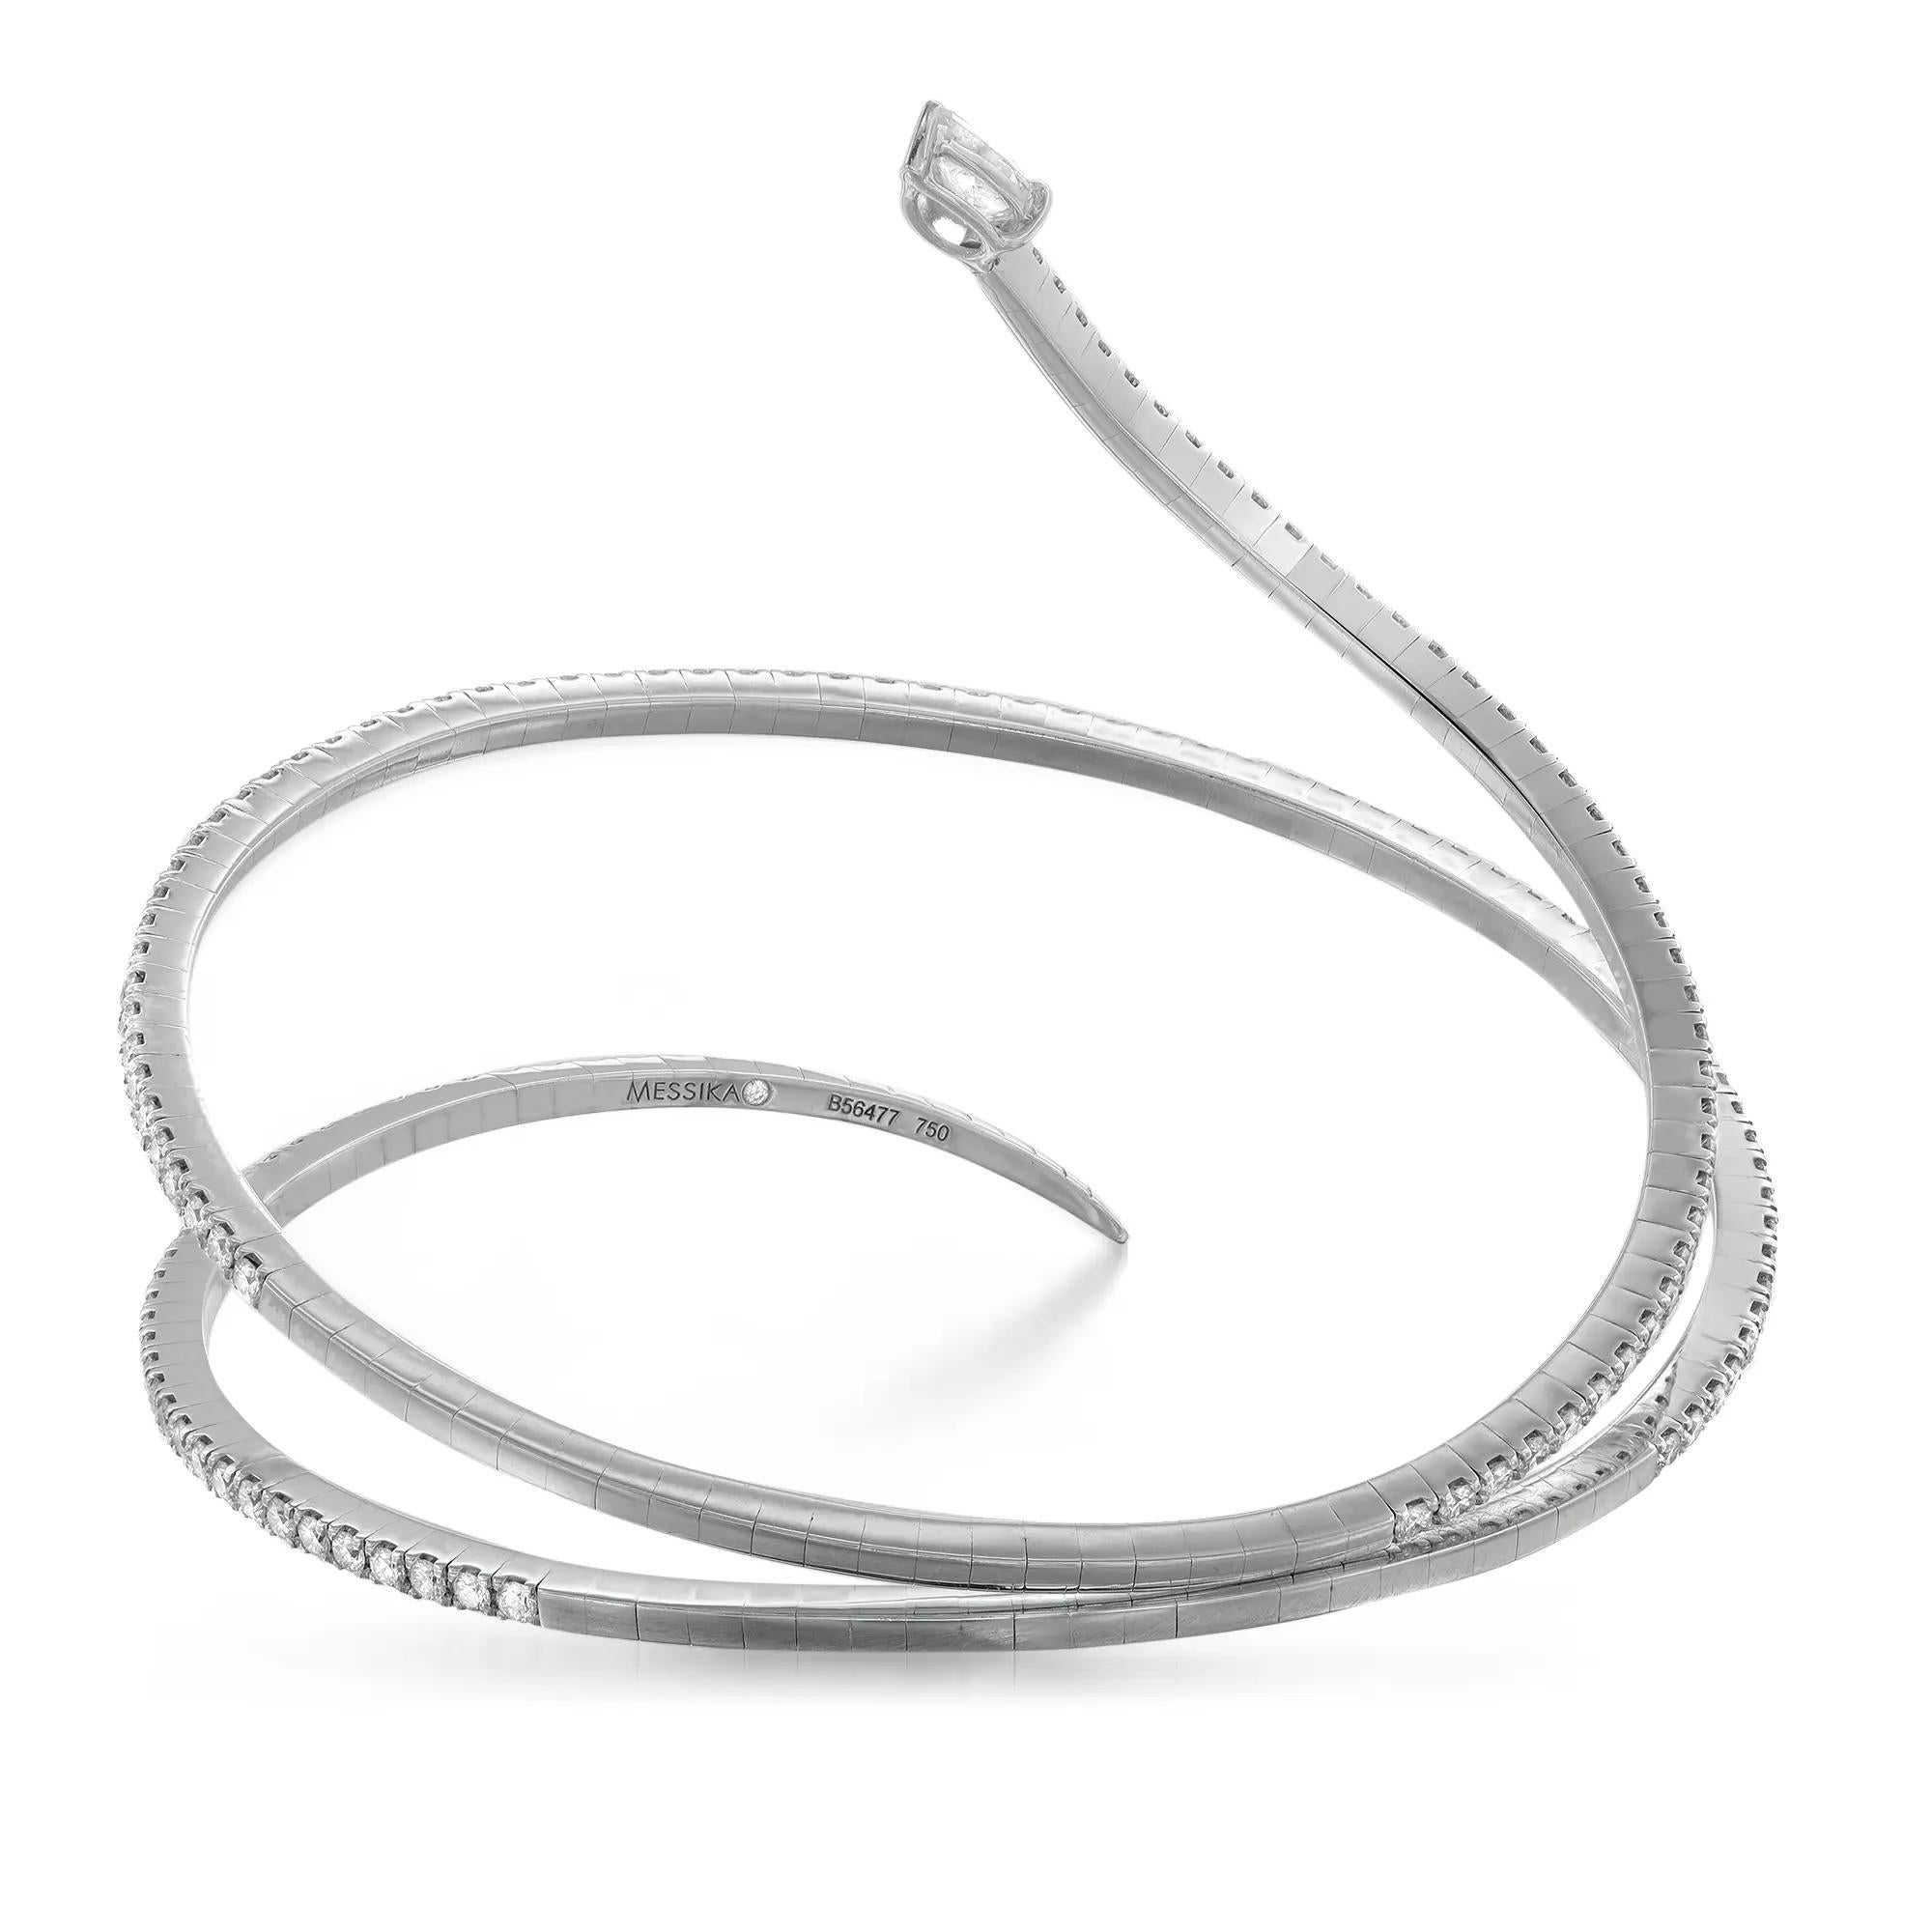 Embrace your wrist with this one of a kind fancy Snake Skinny 2 wrap bracelet by Messika. Crafted in lustrous 18K white gold. This beautiful bracelet features a prong set pear shape diamond at one end with round brilliant cut diamonds studded in a